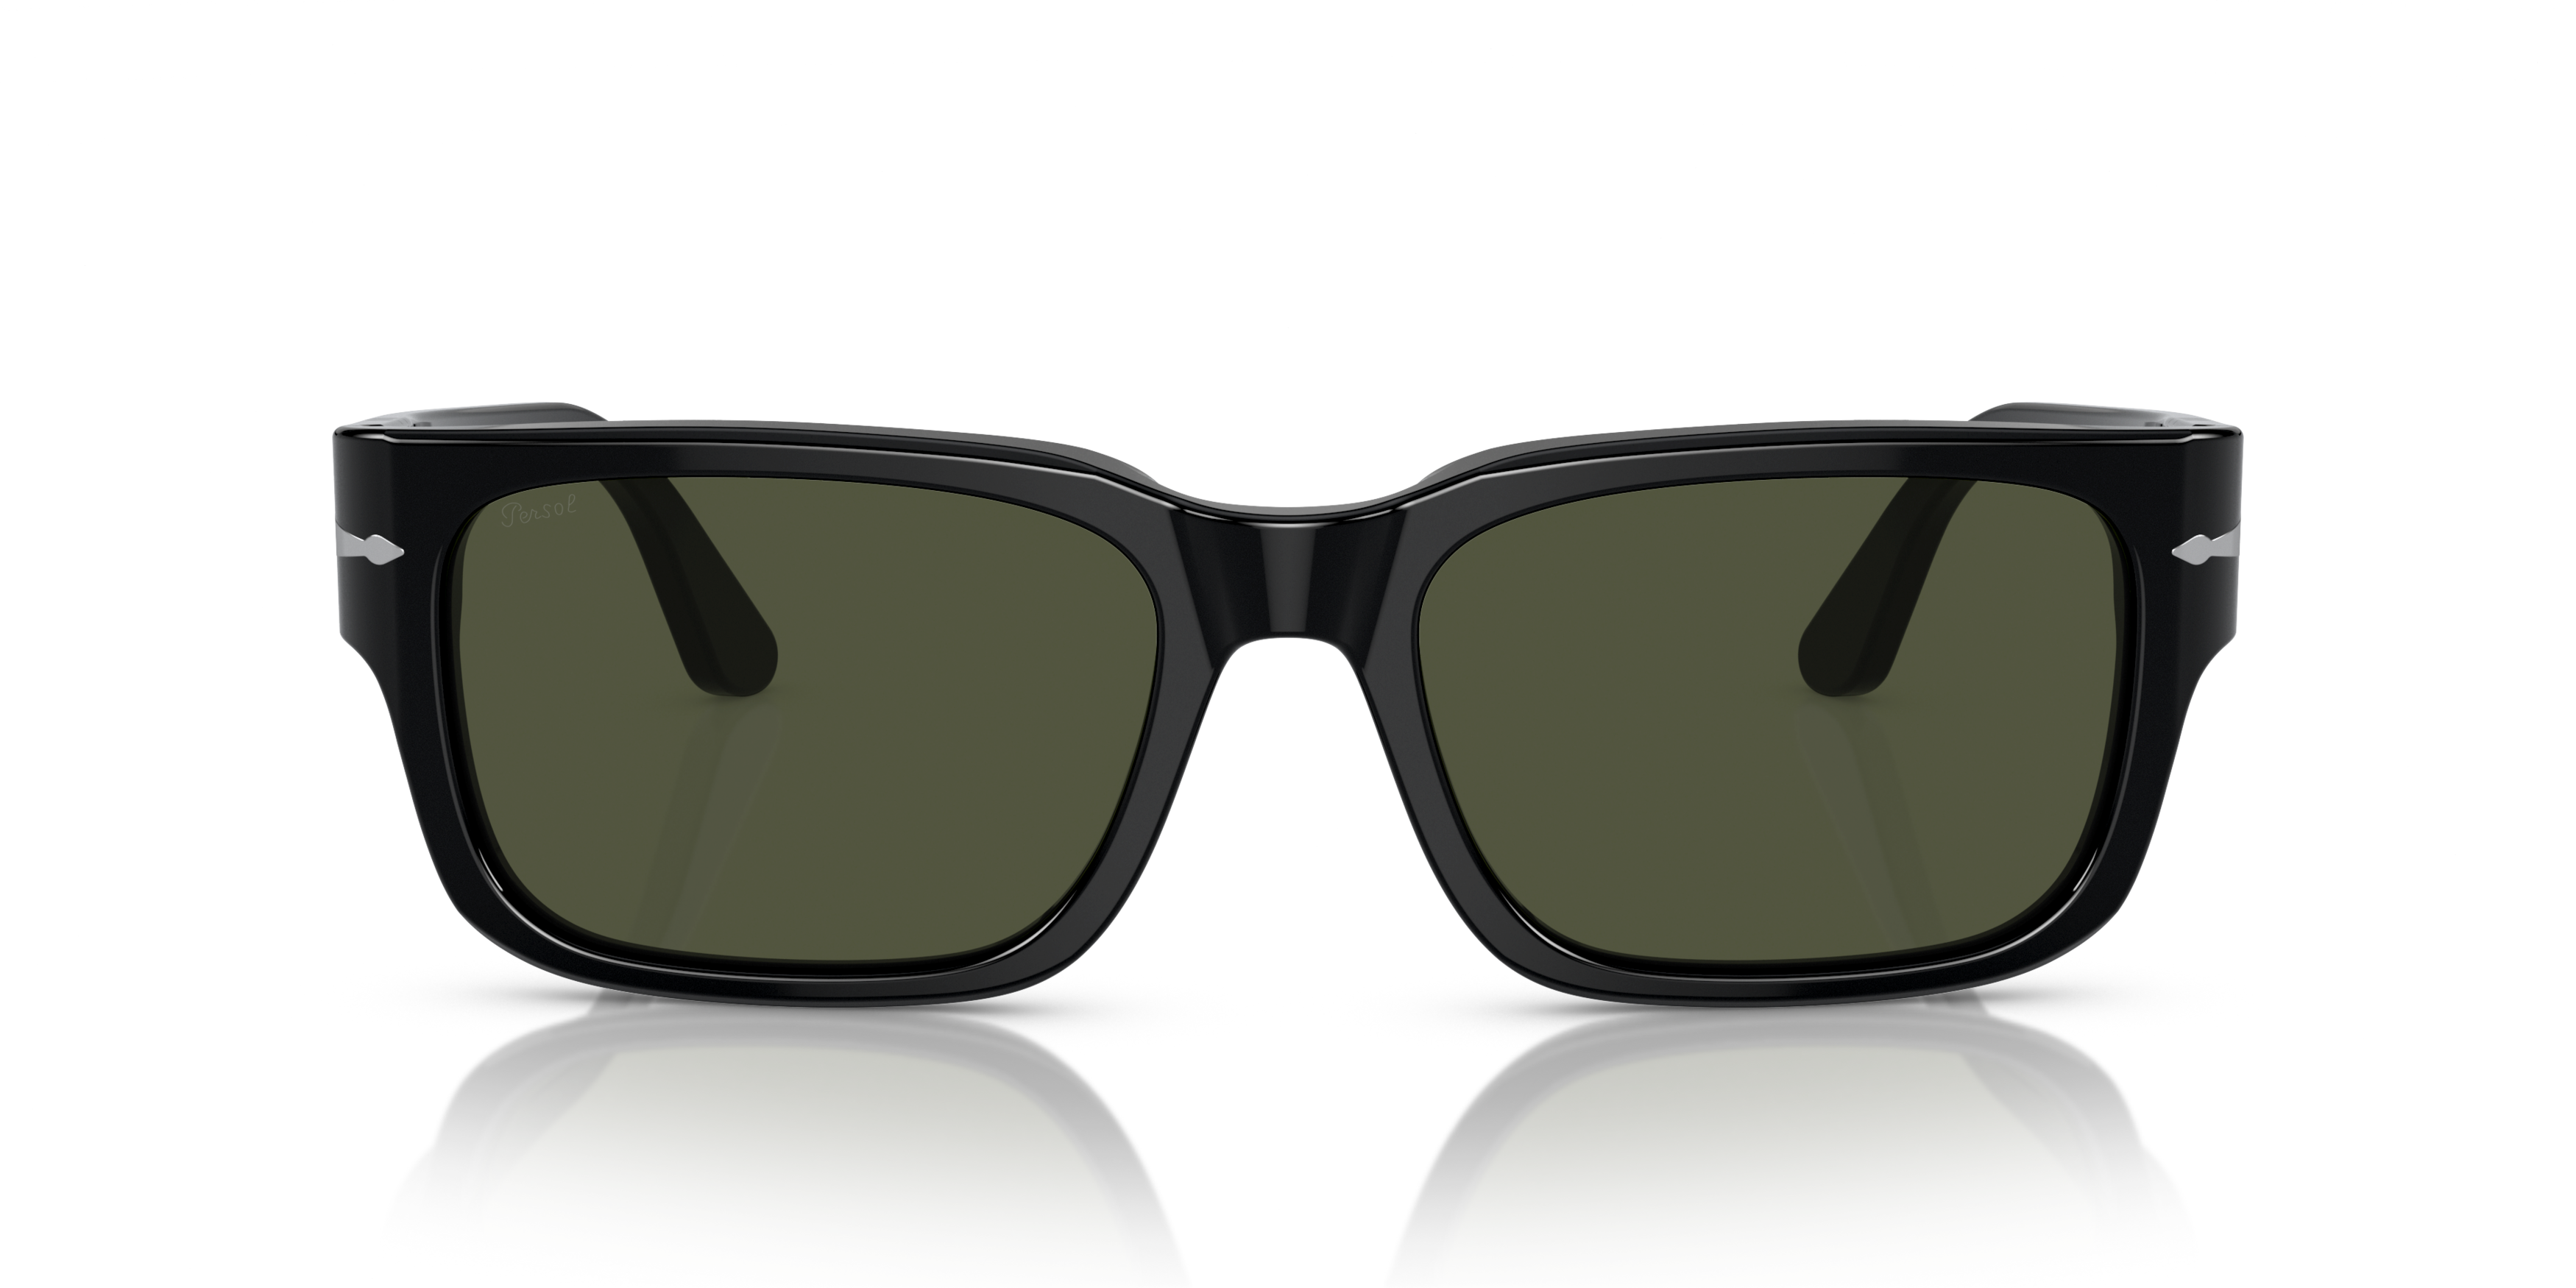 [products.image.front] Persol 0PO3315S 95/31 Solbriller